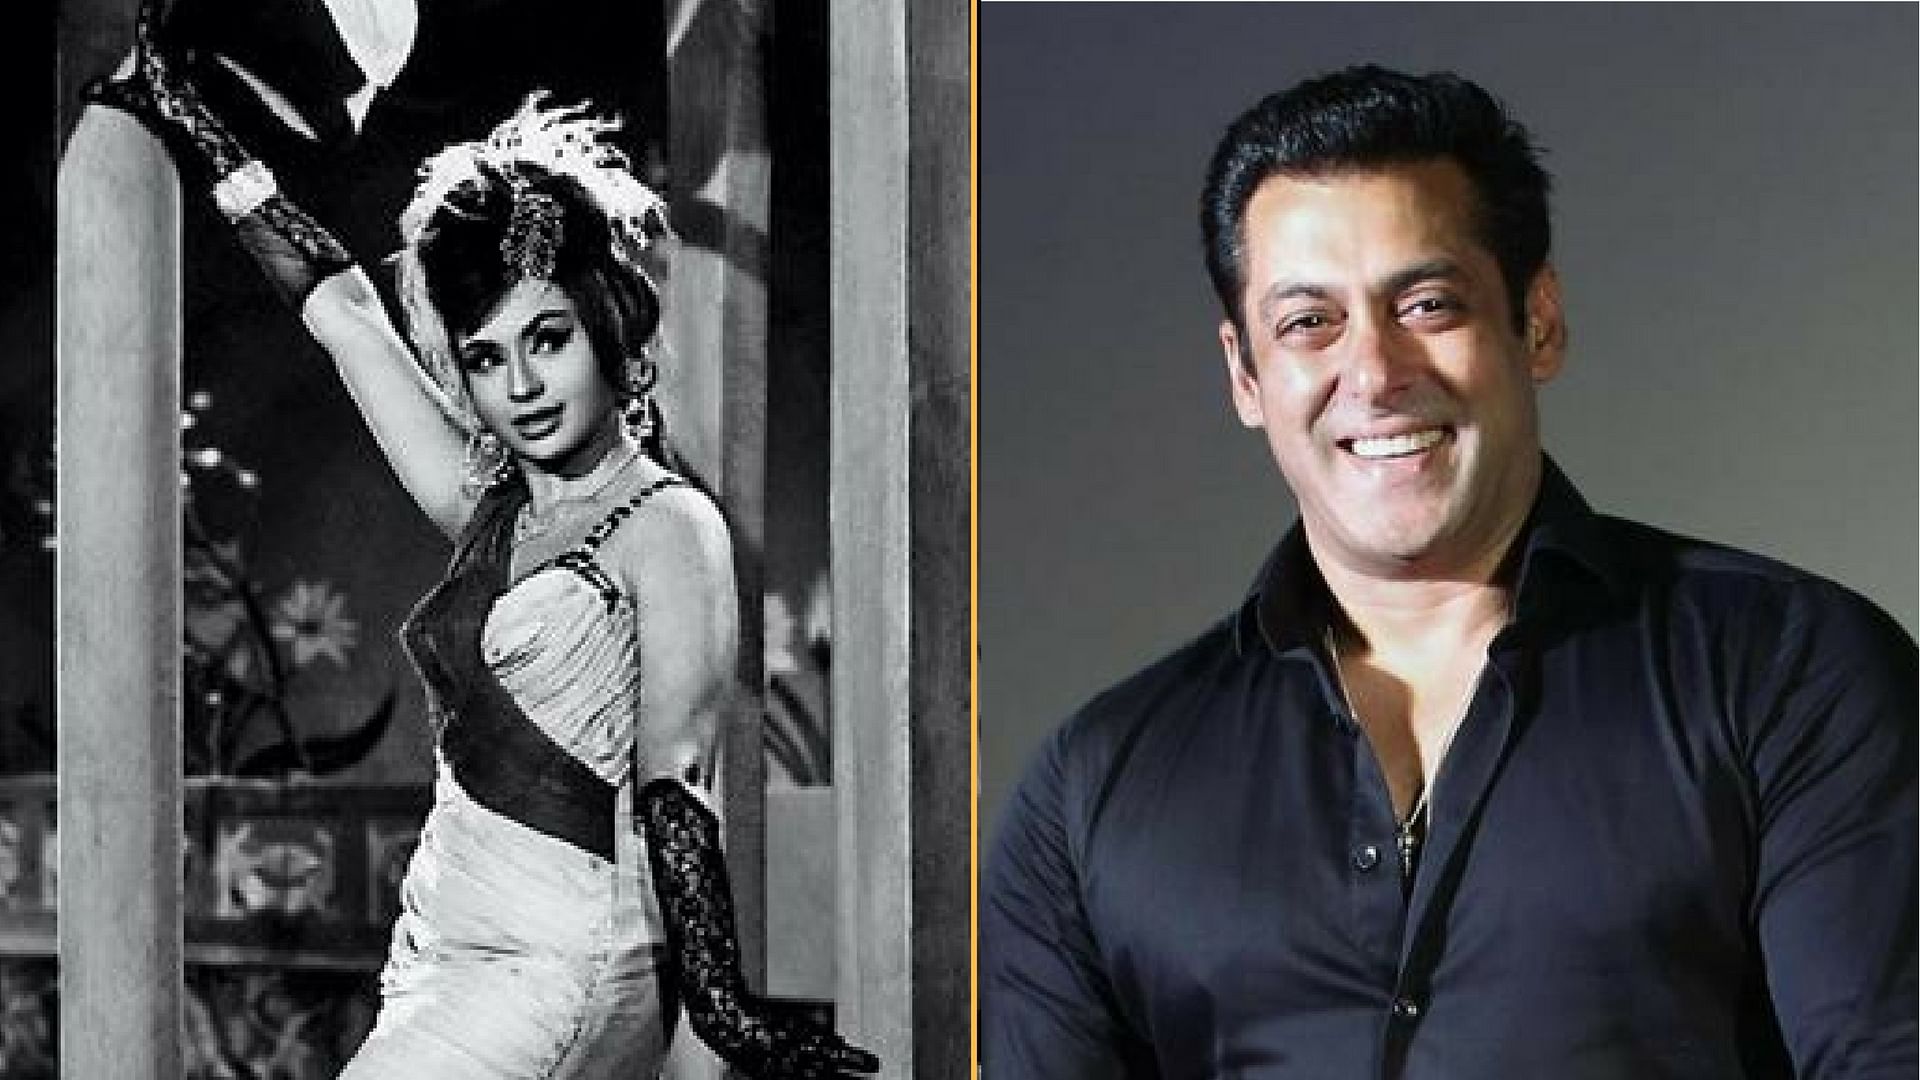 Salman Khan and family might be planning to make a biopic on Helen’s life and career. (Photo courtesy: Twitter)